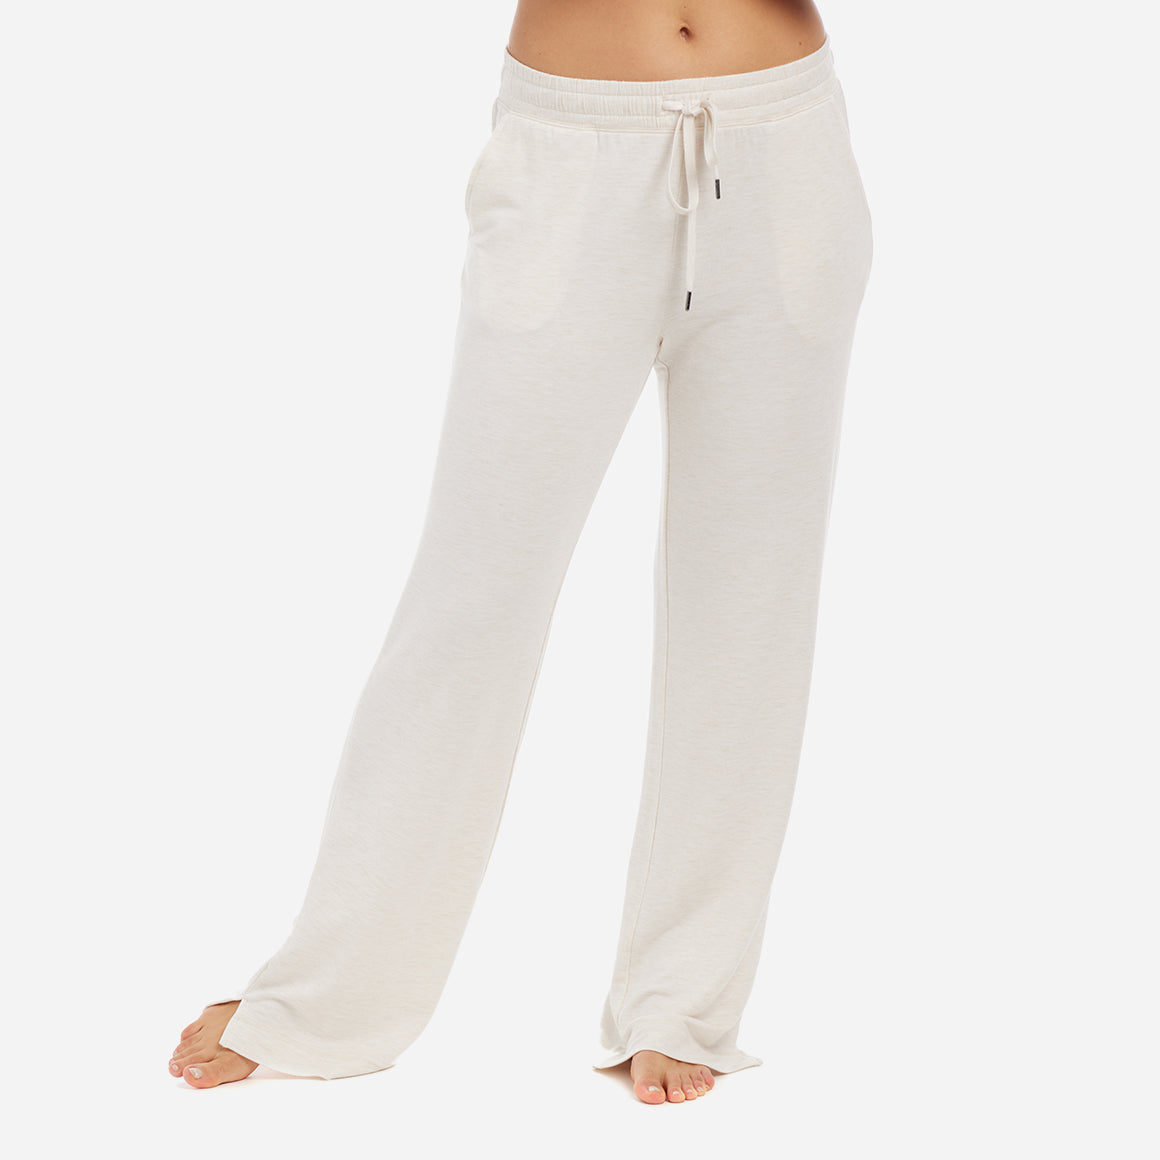 These cozy lounge pants feature convenient hip pockets, a relaxed fit, and an elastic waistband with an adjustable drawstring to provide a customized and secure fit.